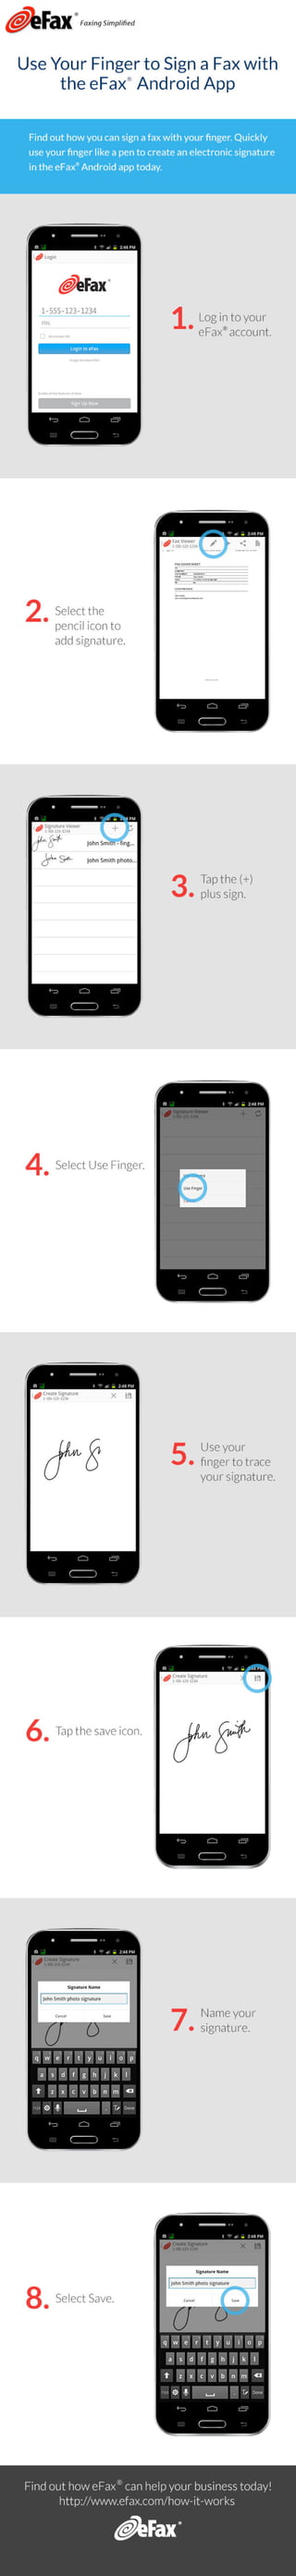 Sign a Fax with the eFax Android App